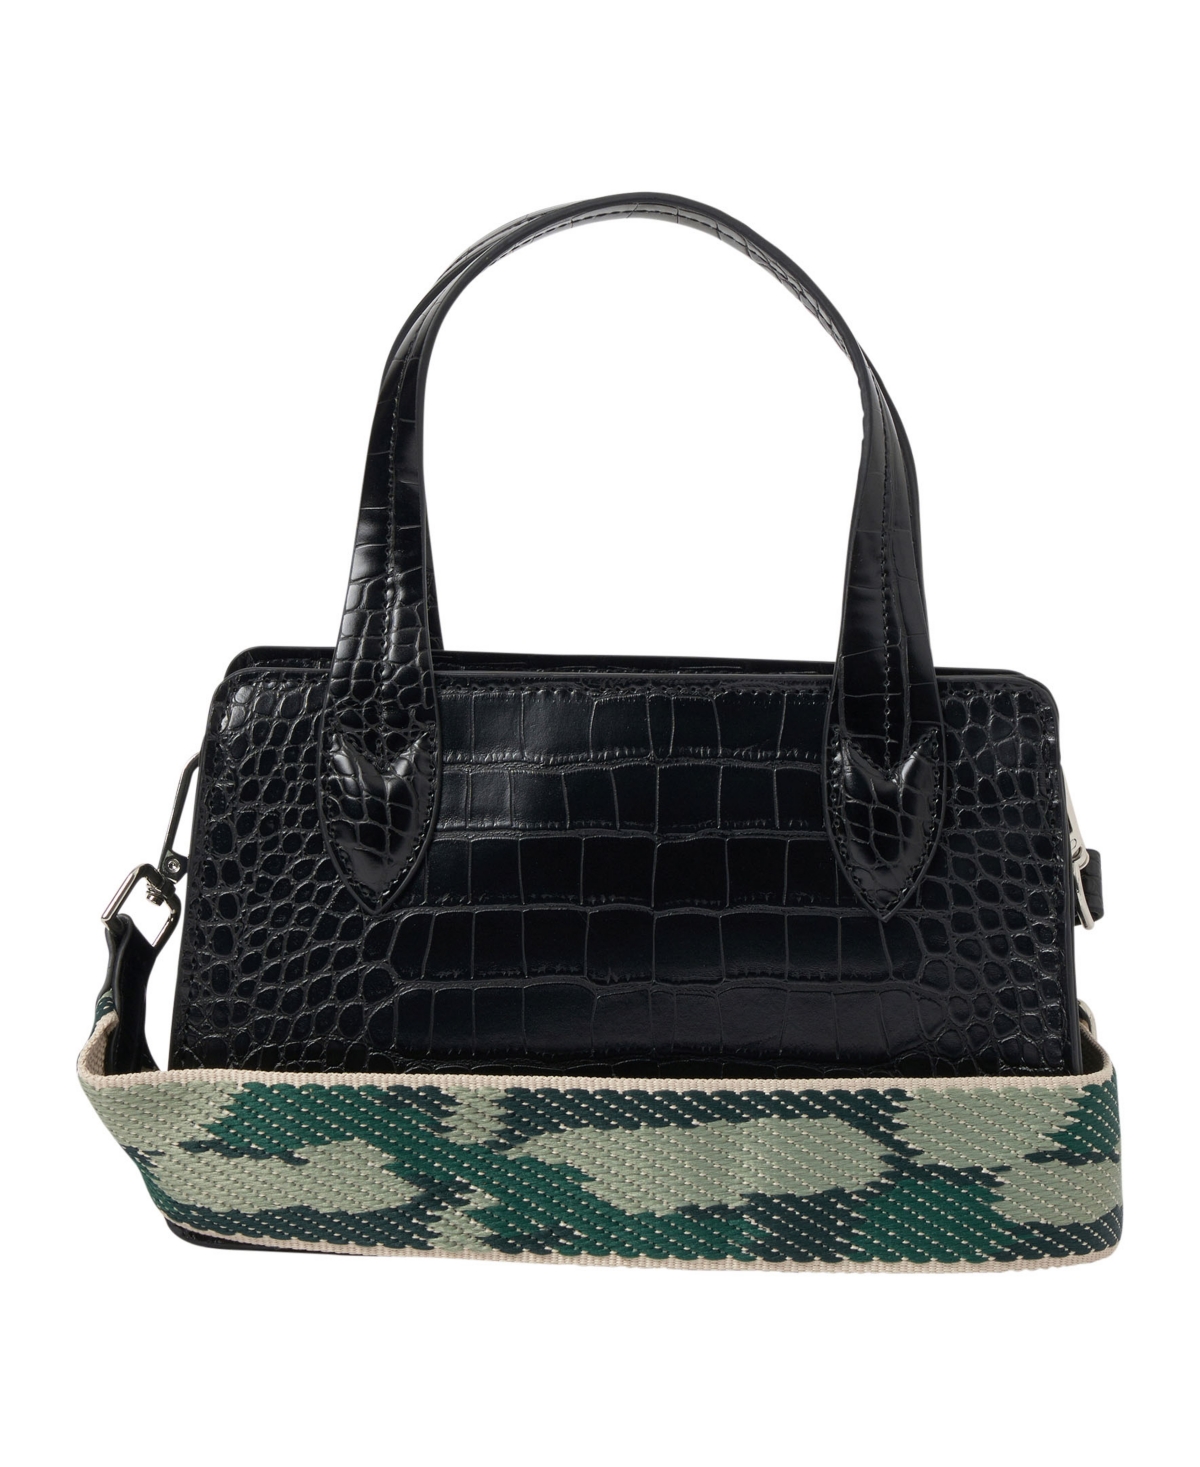 August Croc-effect Faux Leather Crossbody Bag - Green